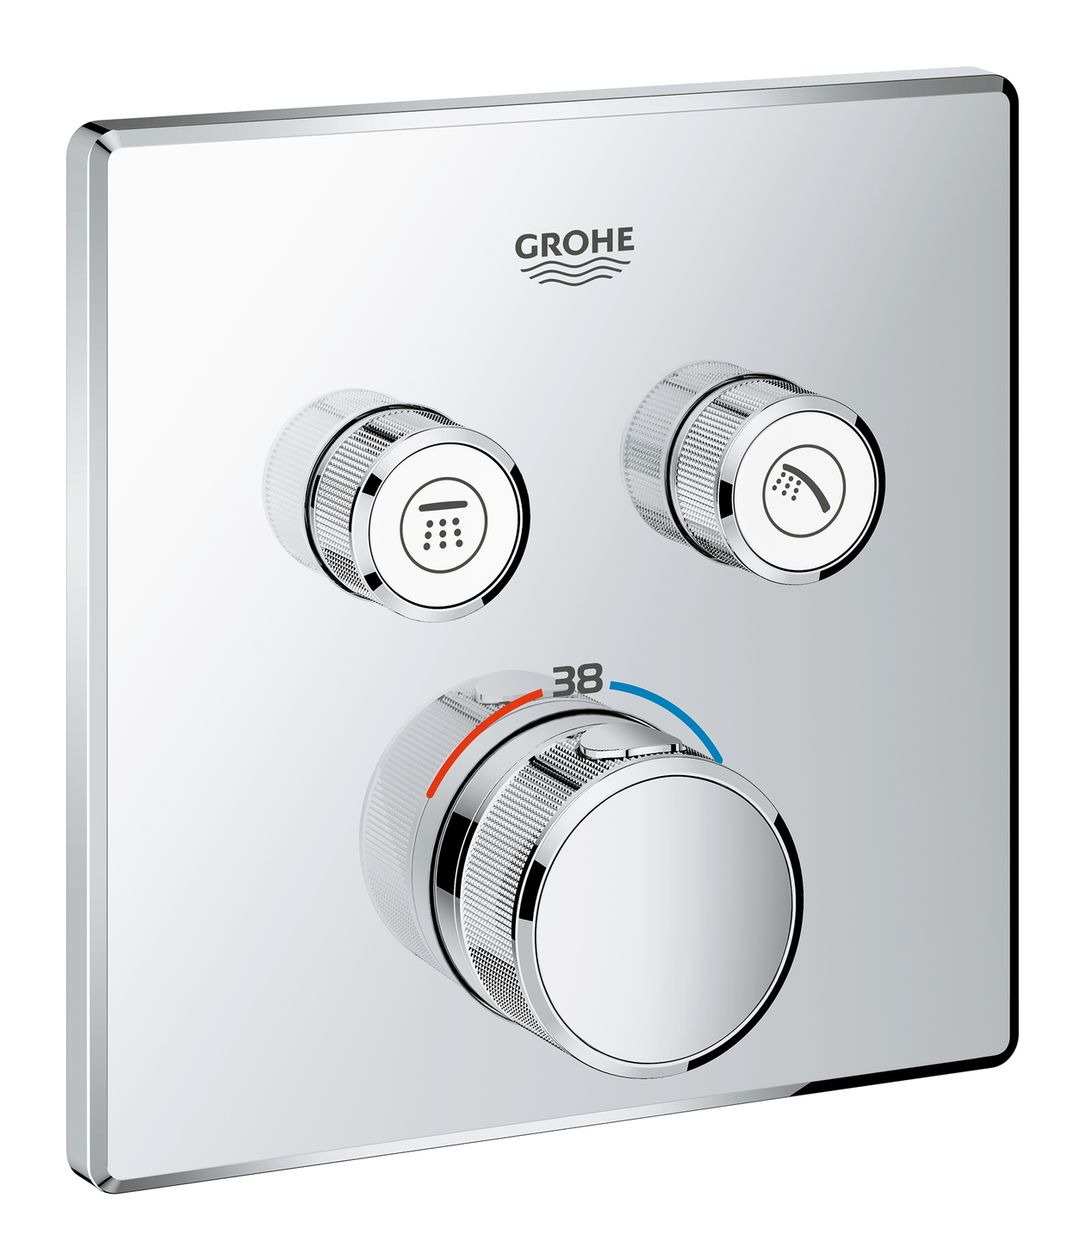 Grohe Thermostaatkraan Douche Grohtherm SmartControl met omstelling | SuperBath